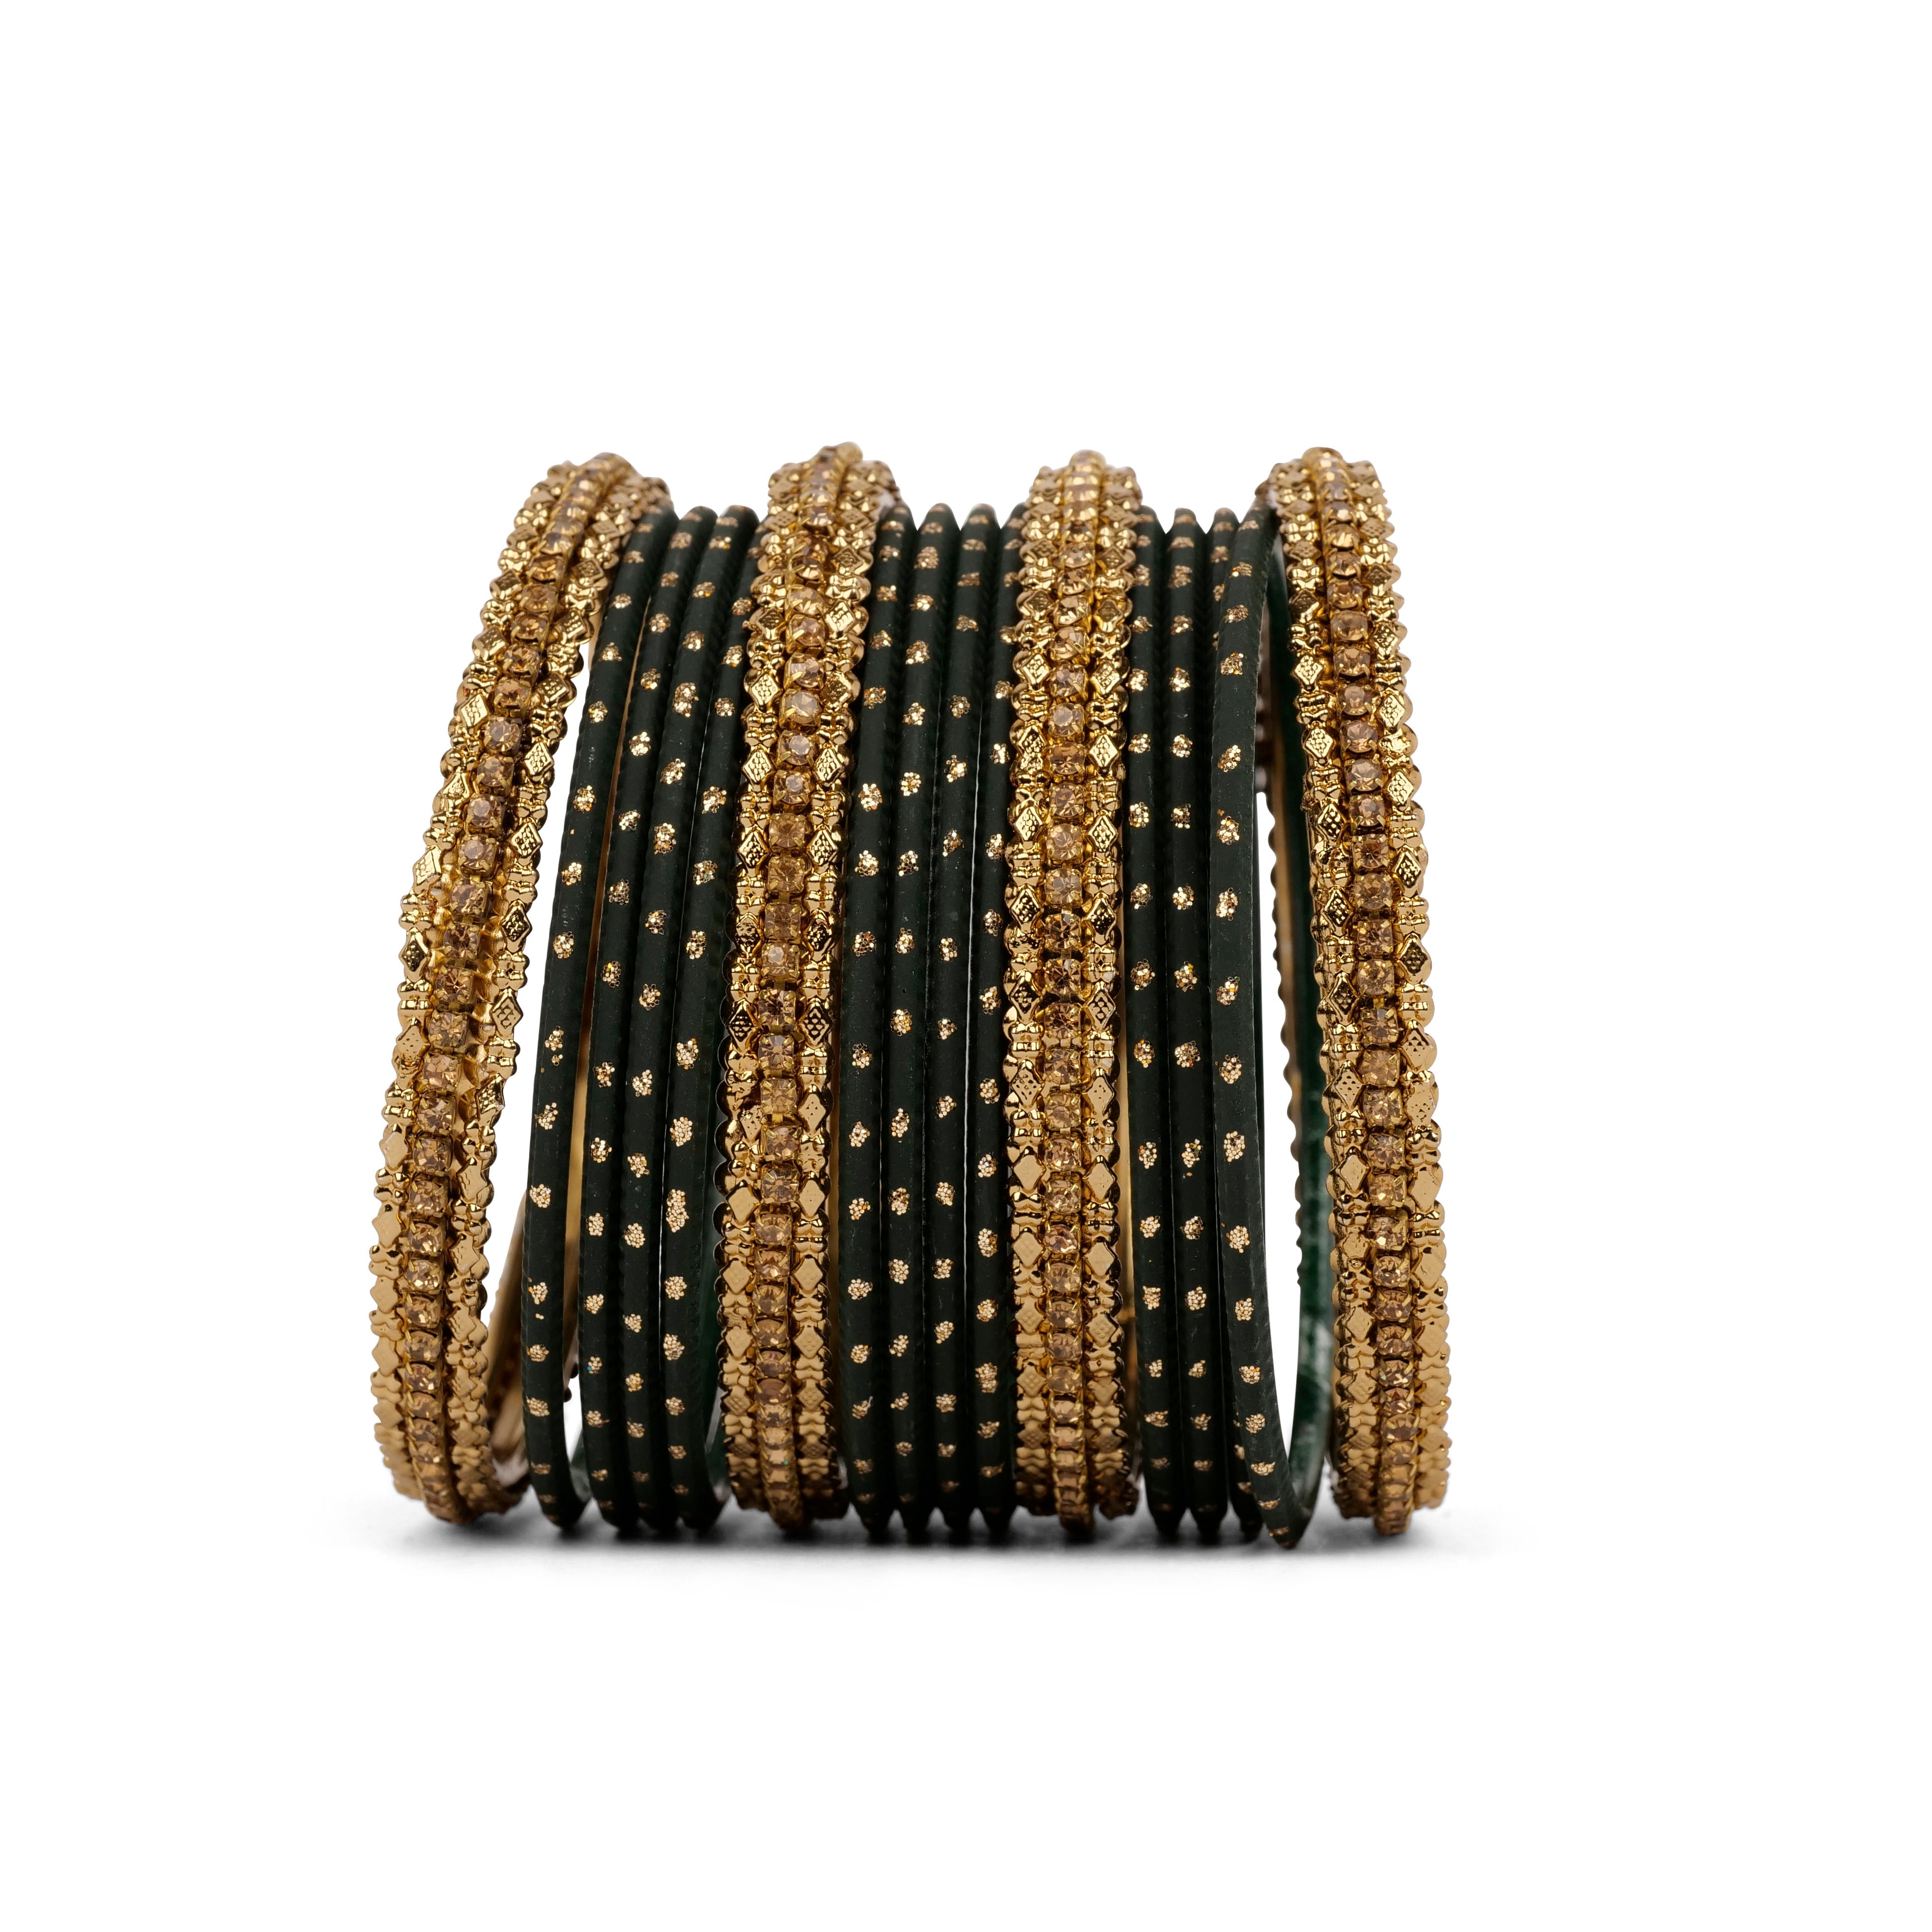 Simple Bangle Set in Dark Green and Antique Gold